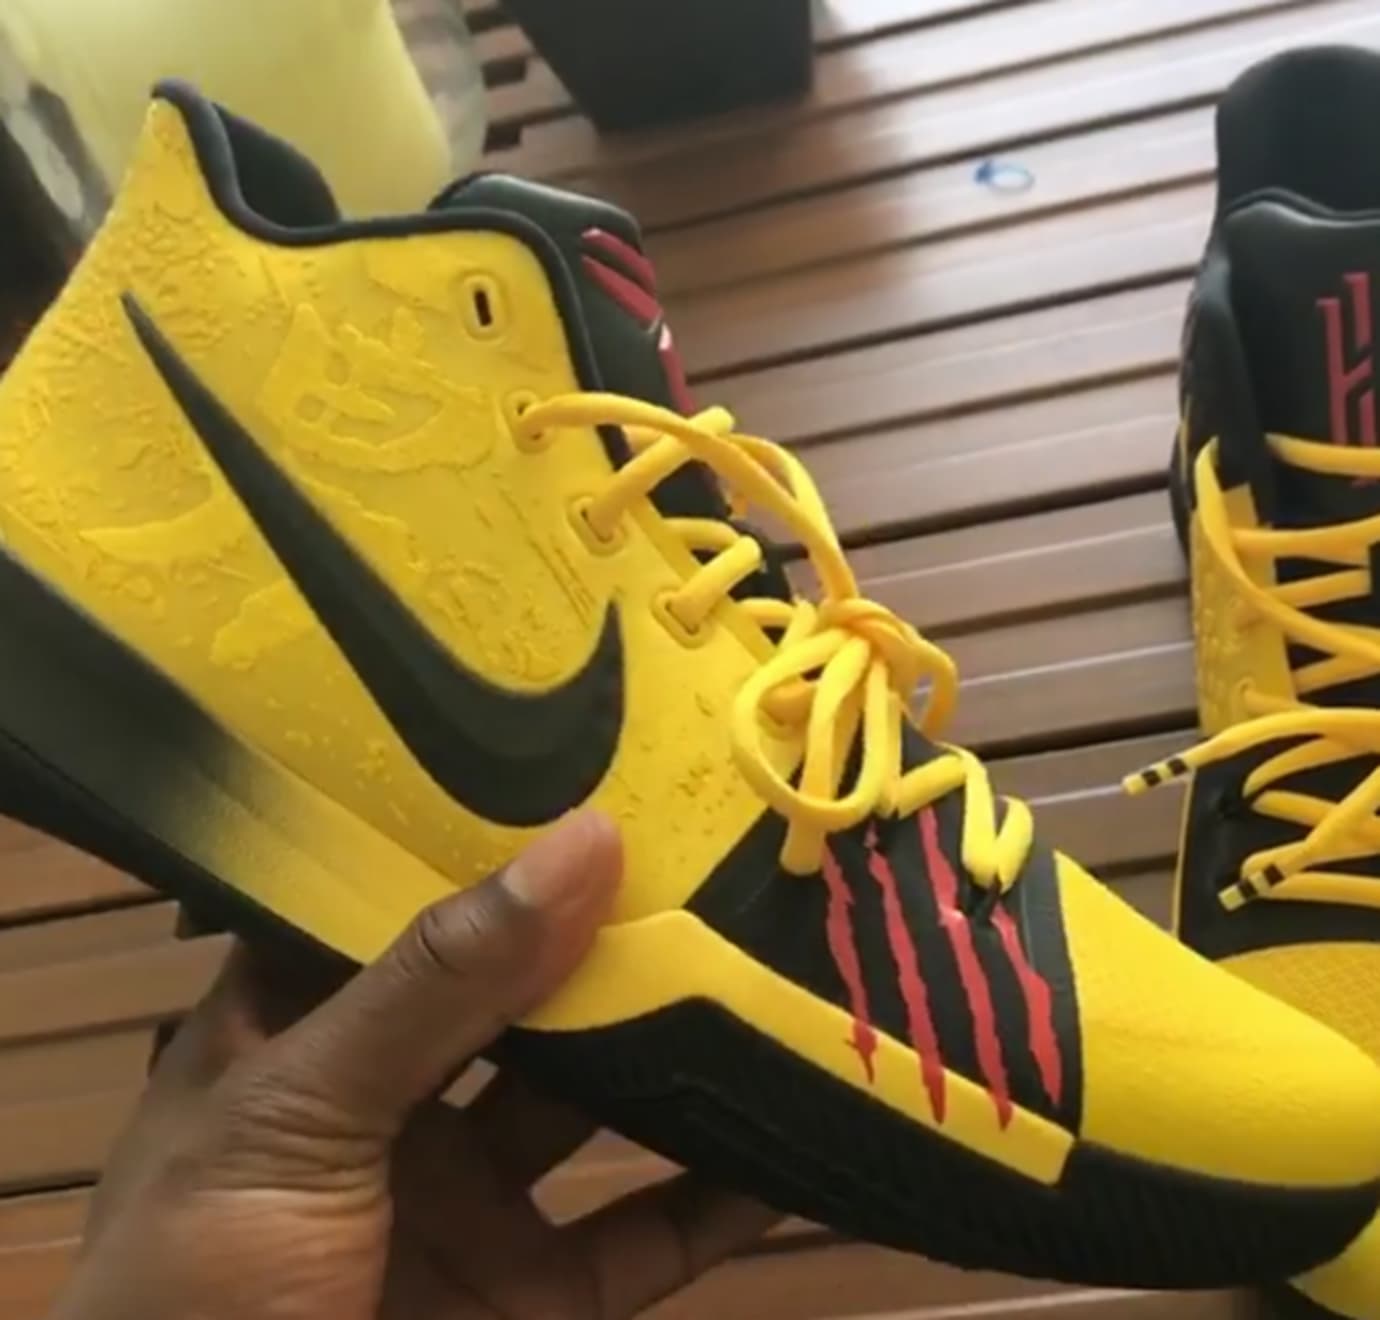 kyrie and kobe collaboration shoe